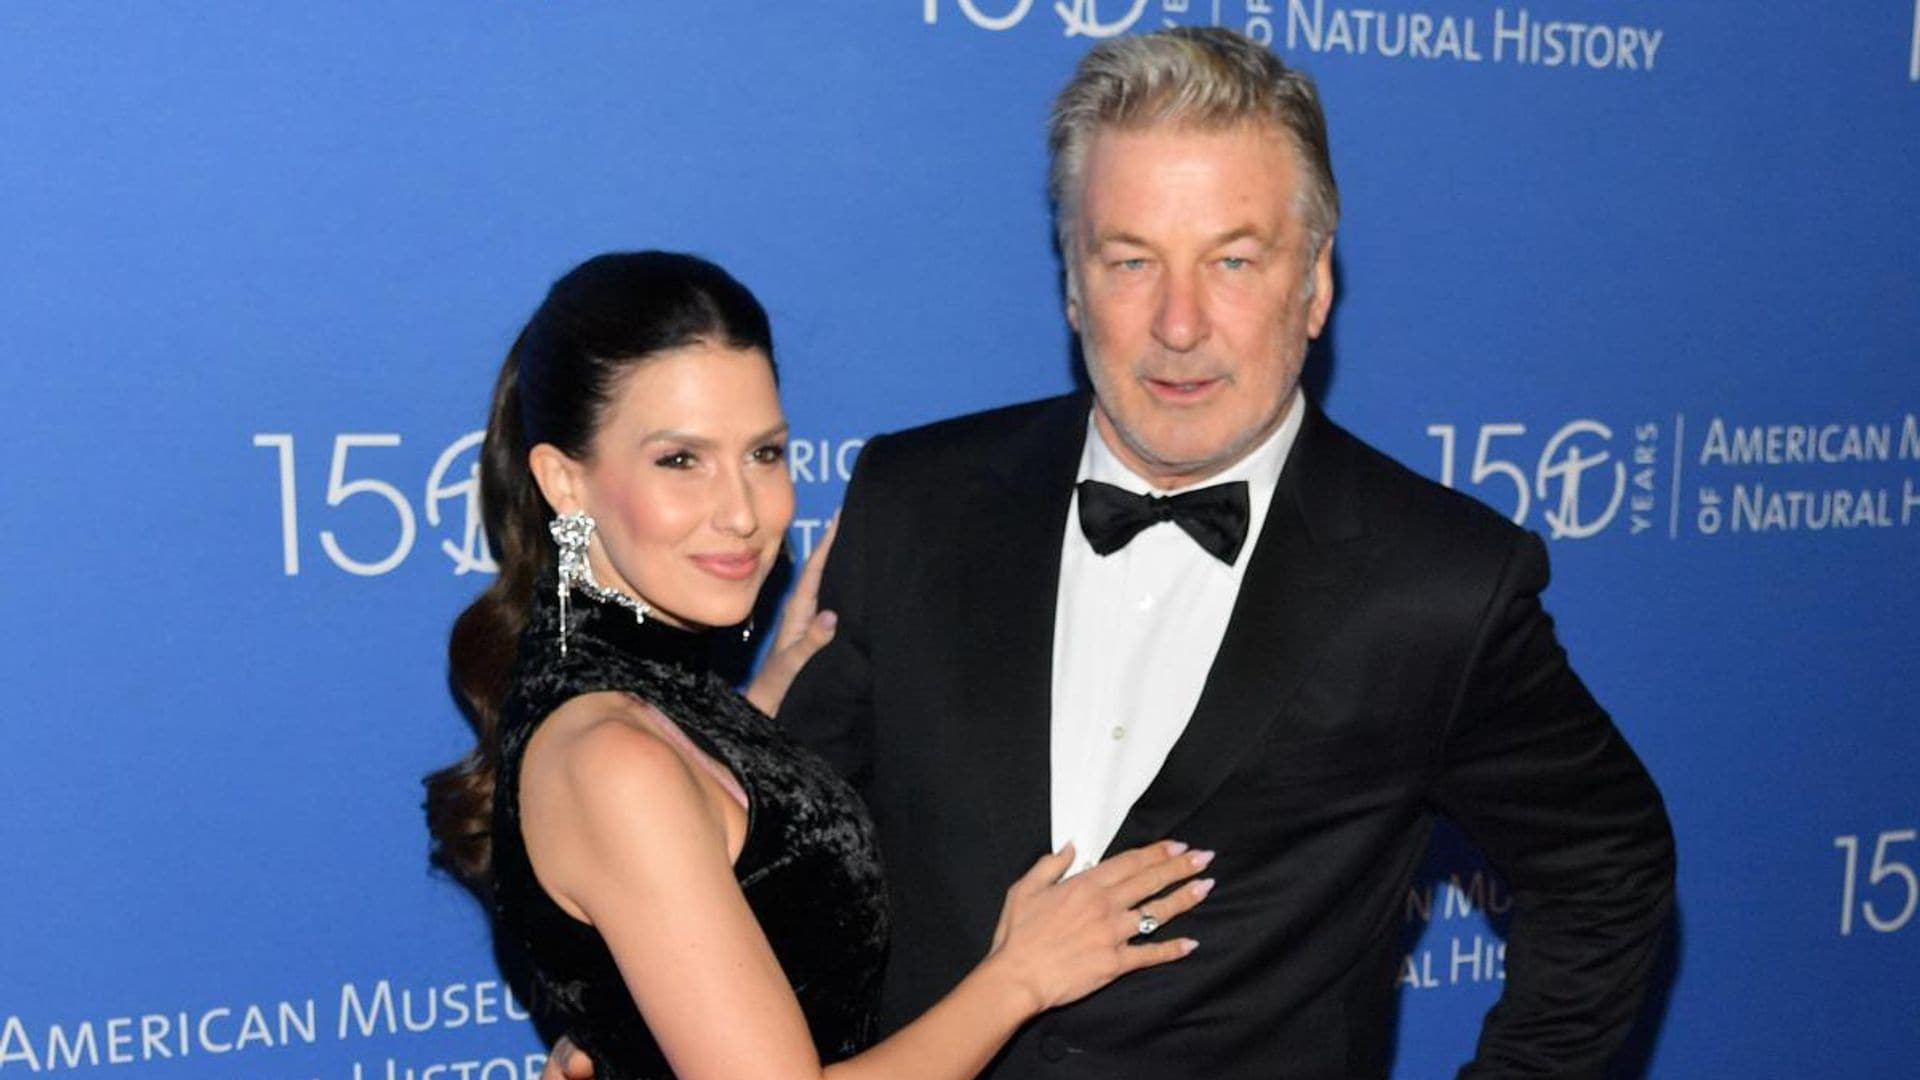 Alec Baldwin will face charges due to film set shooting